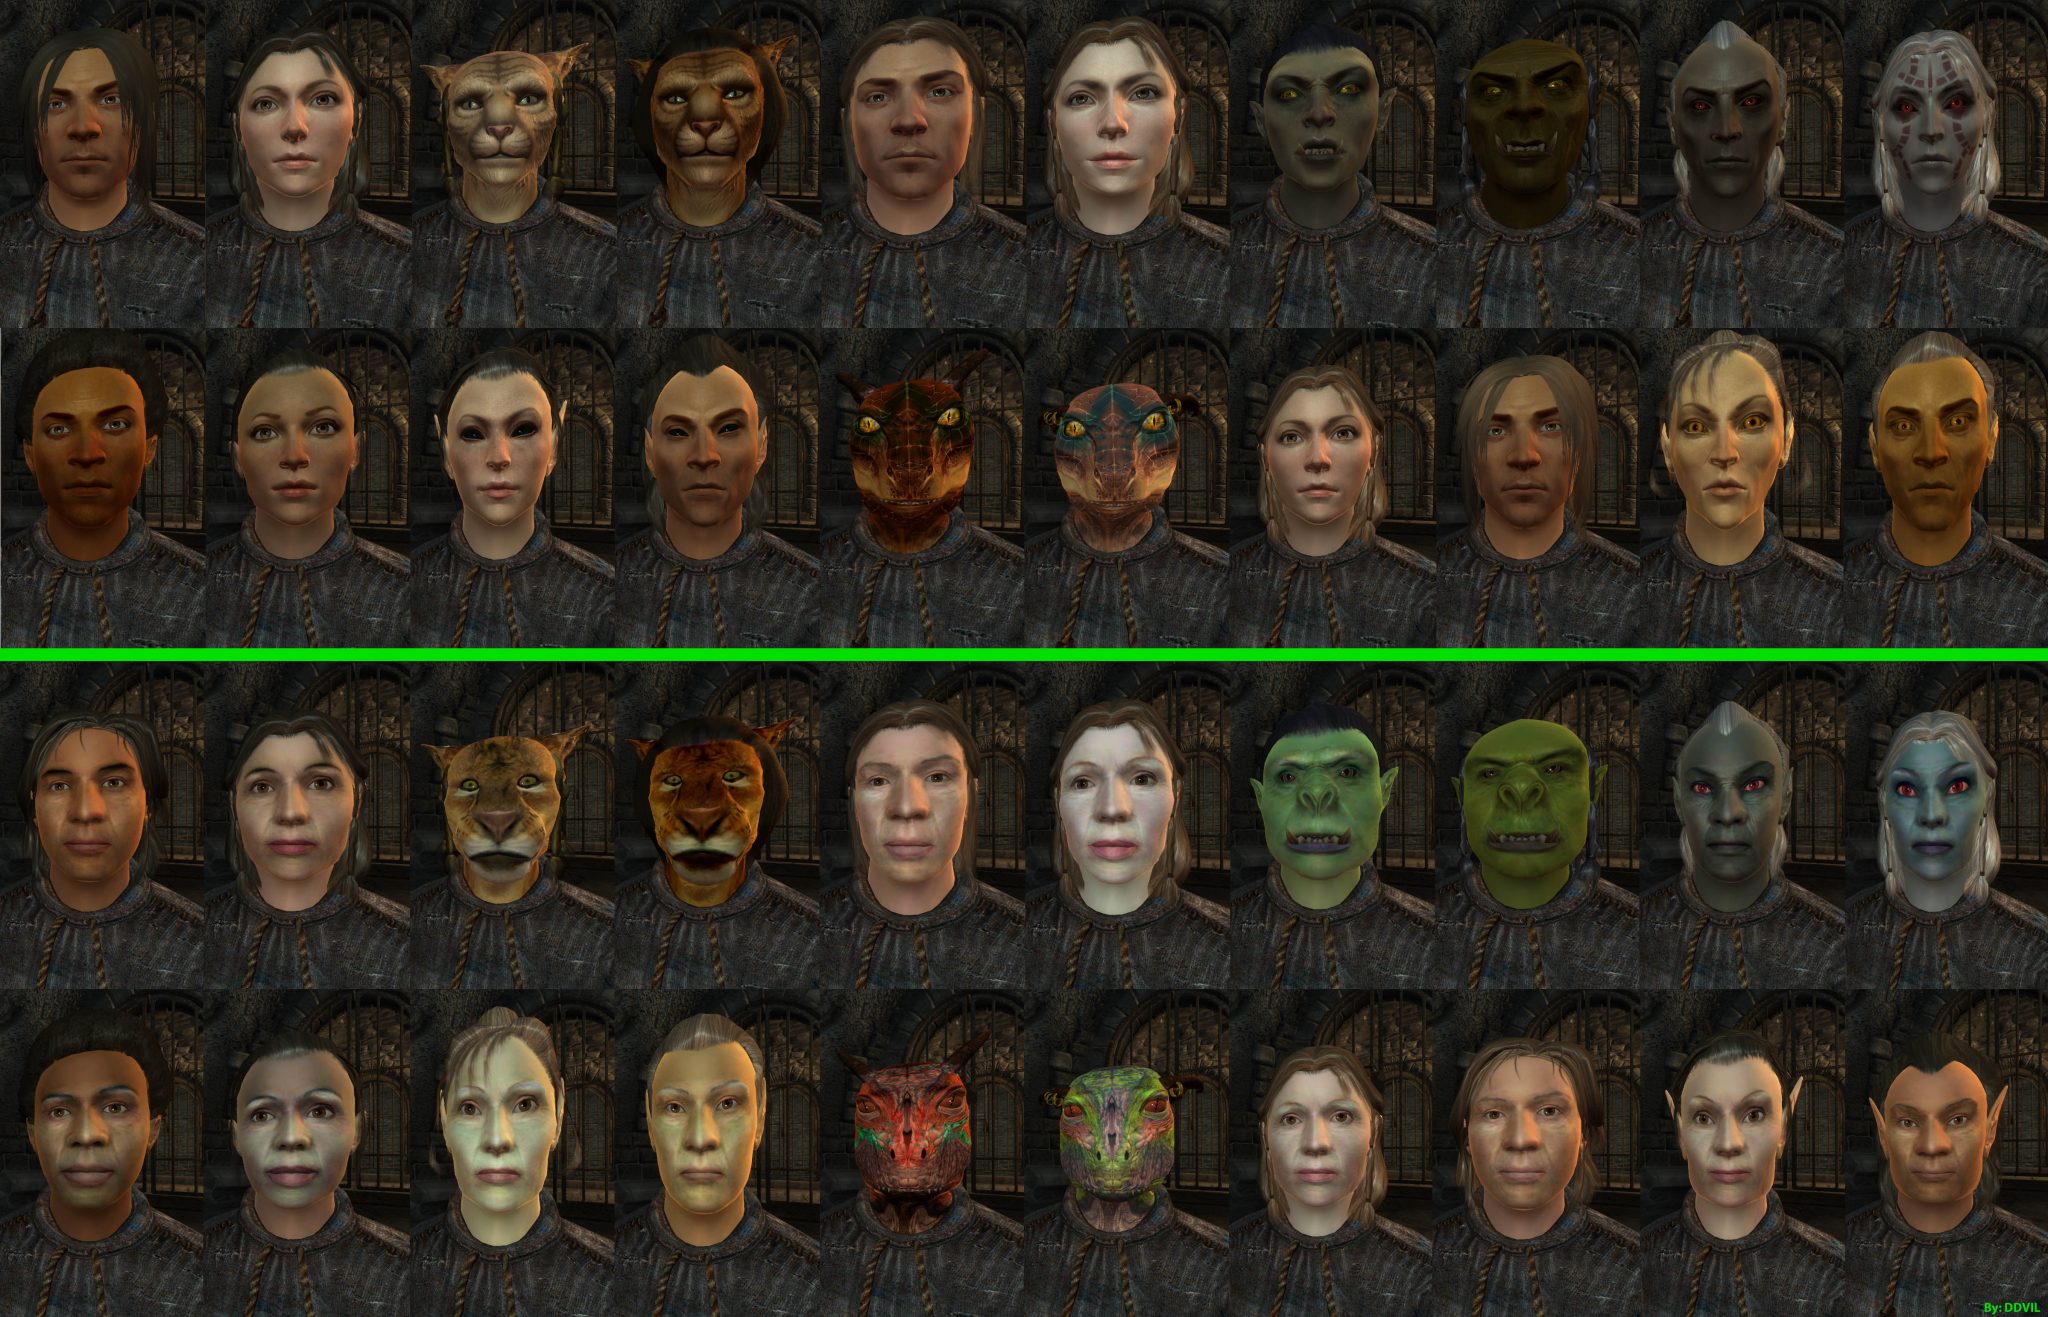 oblivion character overhaul mod writing on faces